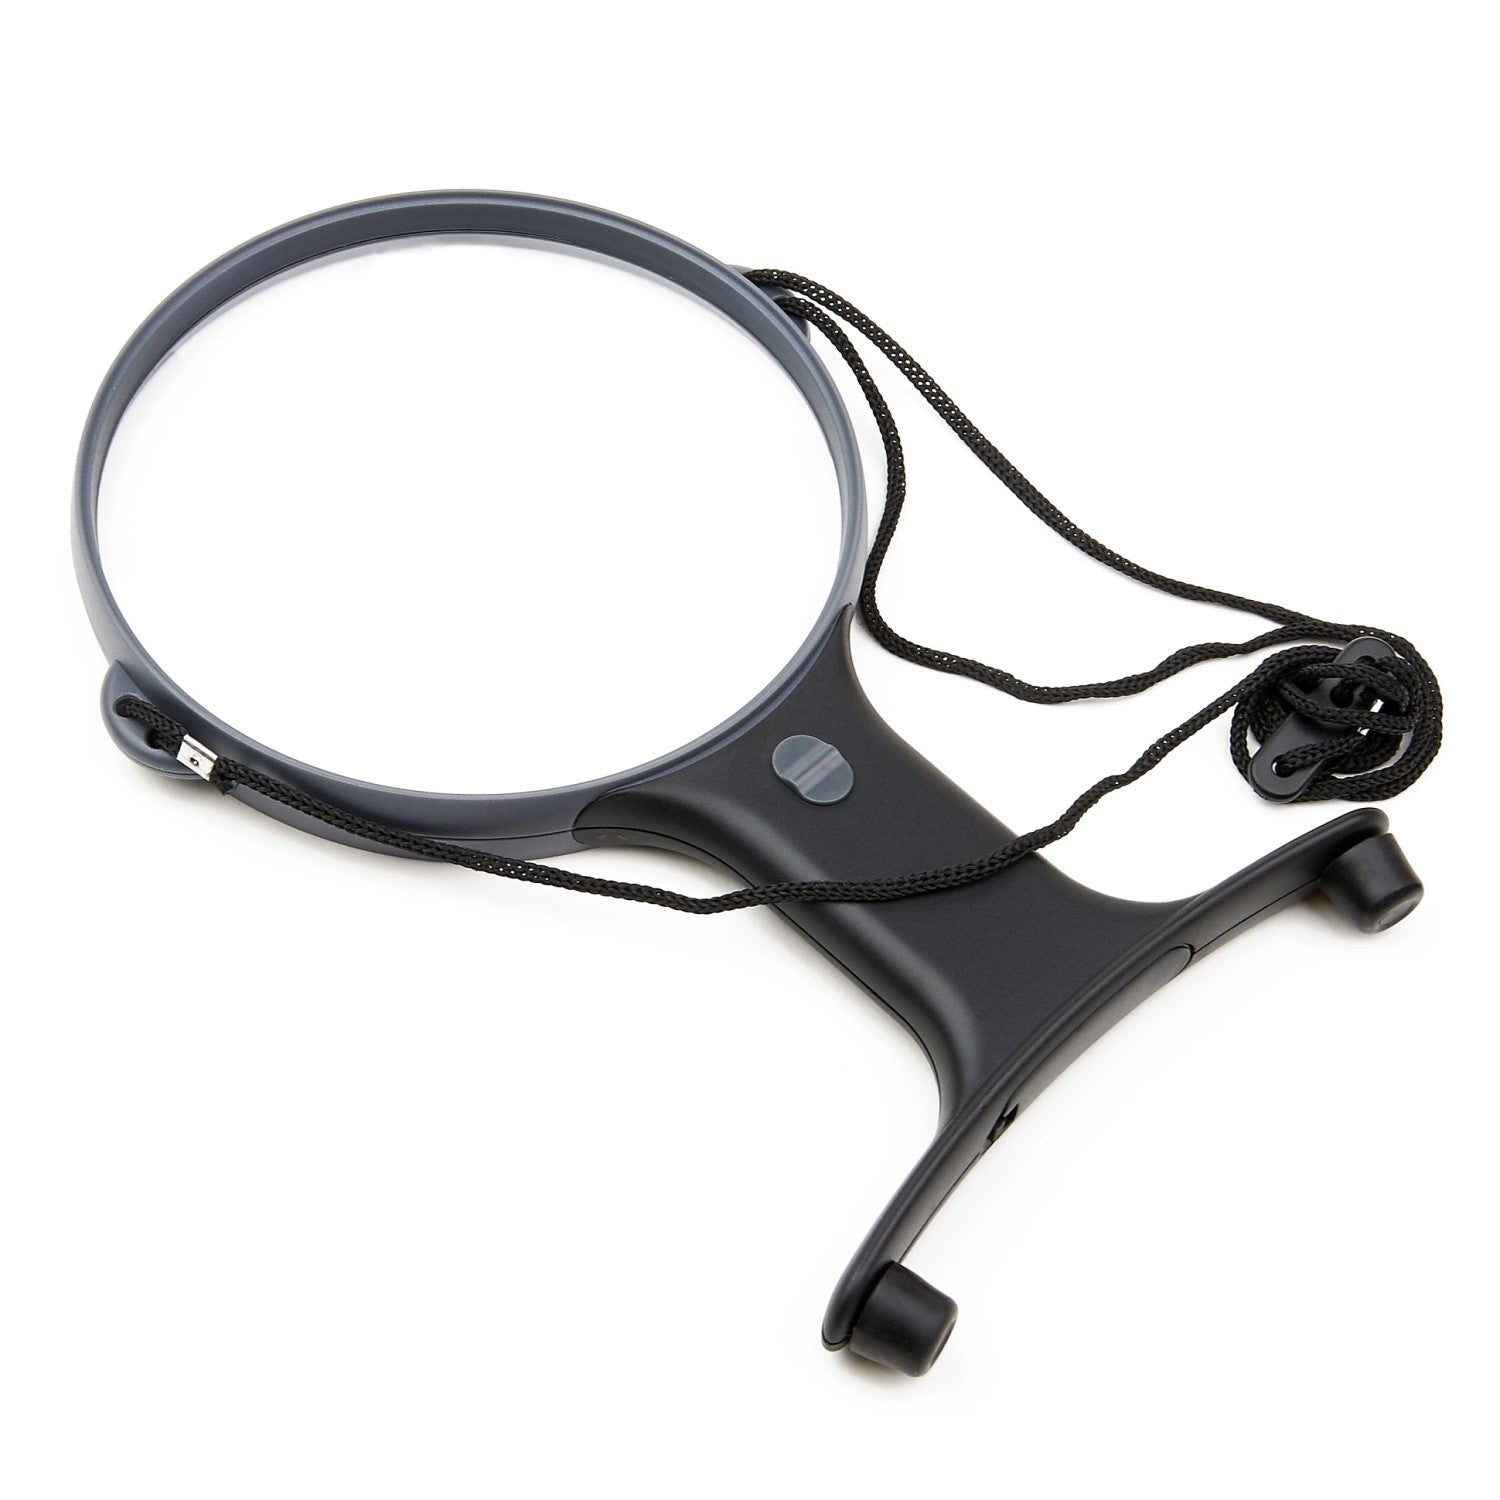 Image of MagniShine device with neck strap available.